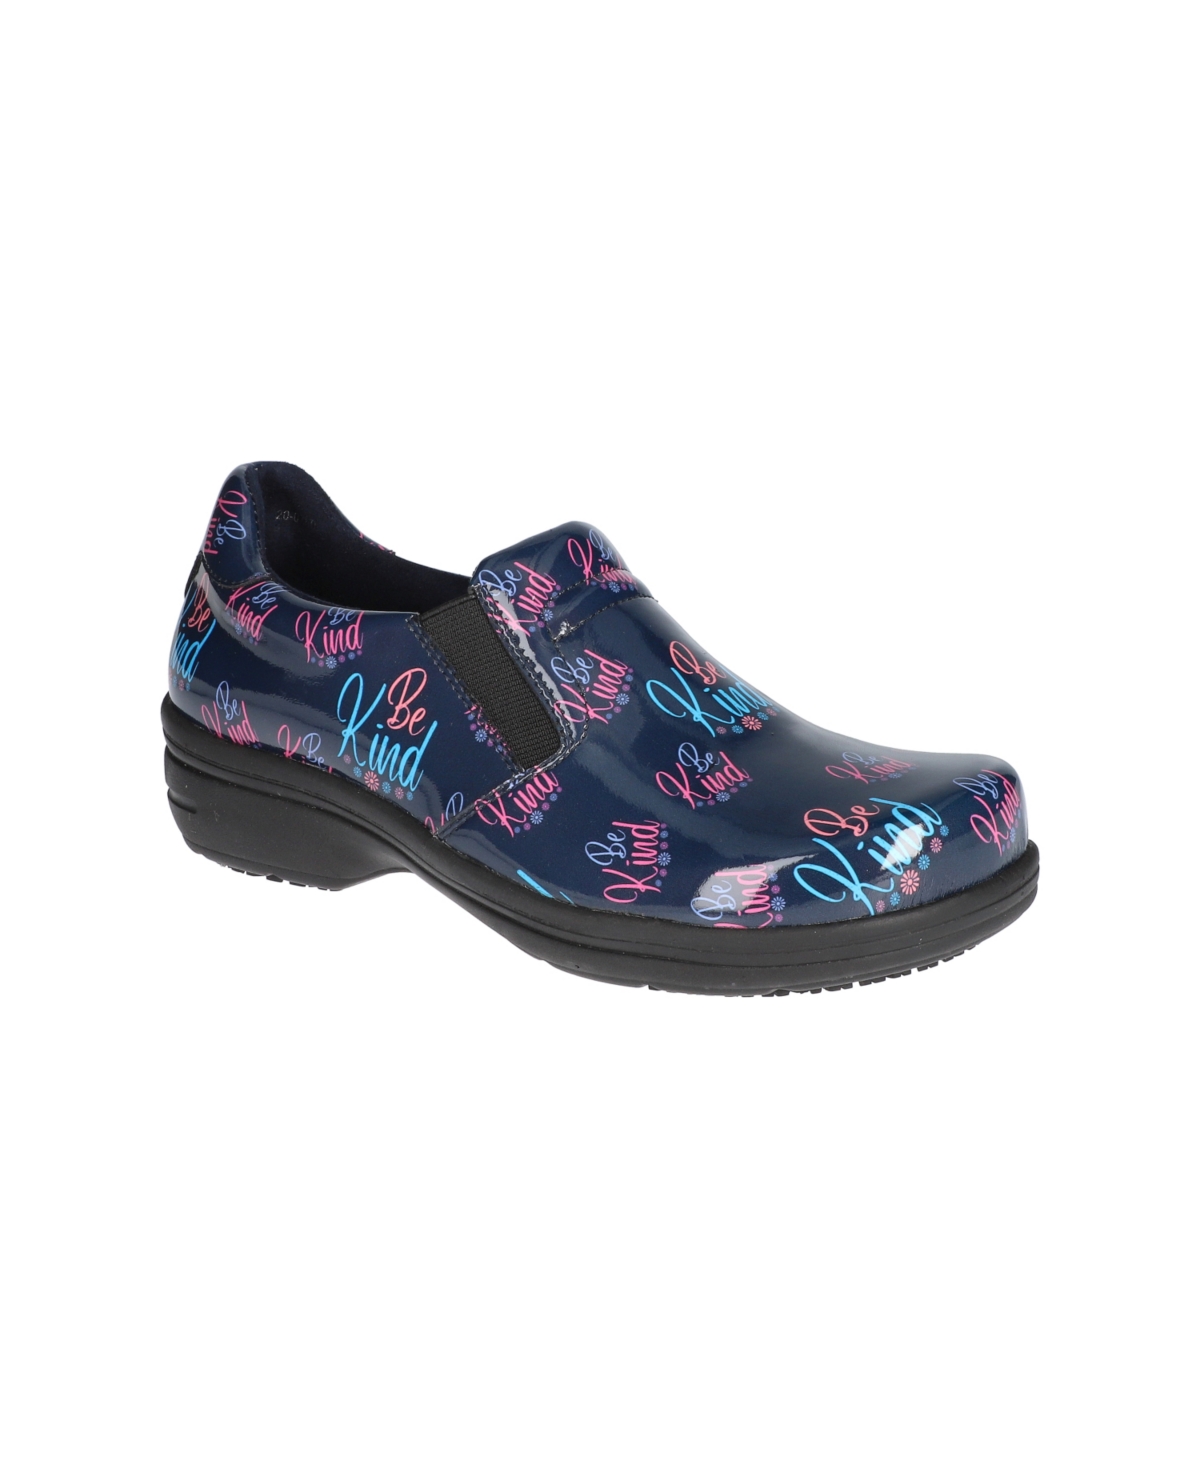 Women's Bind Slip Resistant Clogs - Navy Be Kind Patent Leather